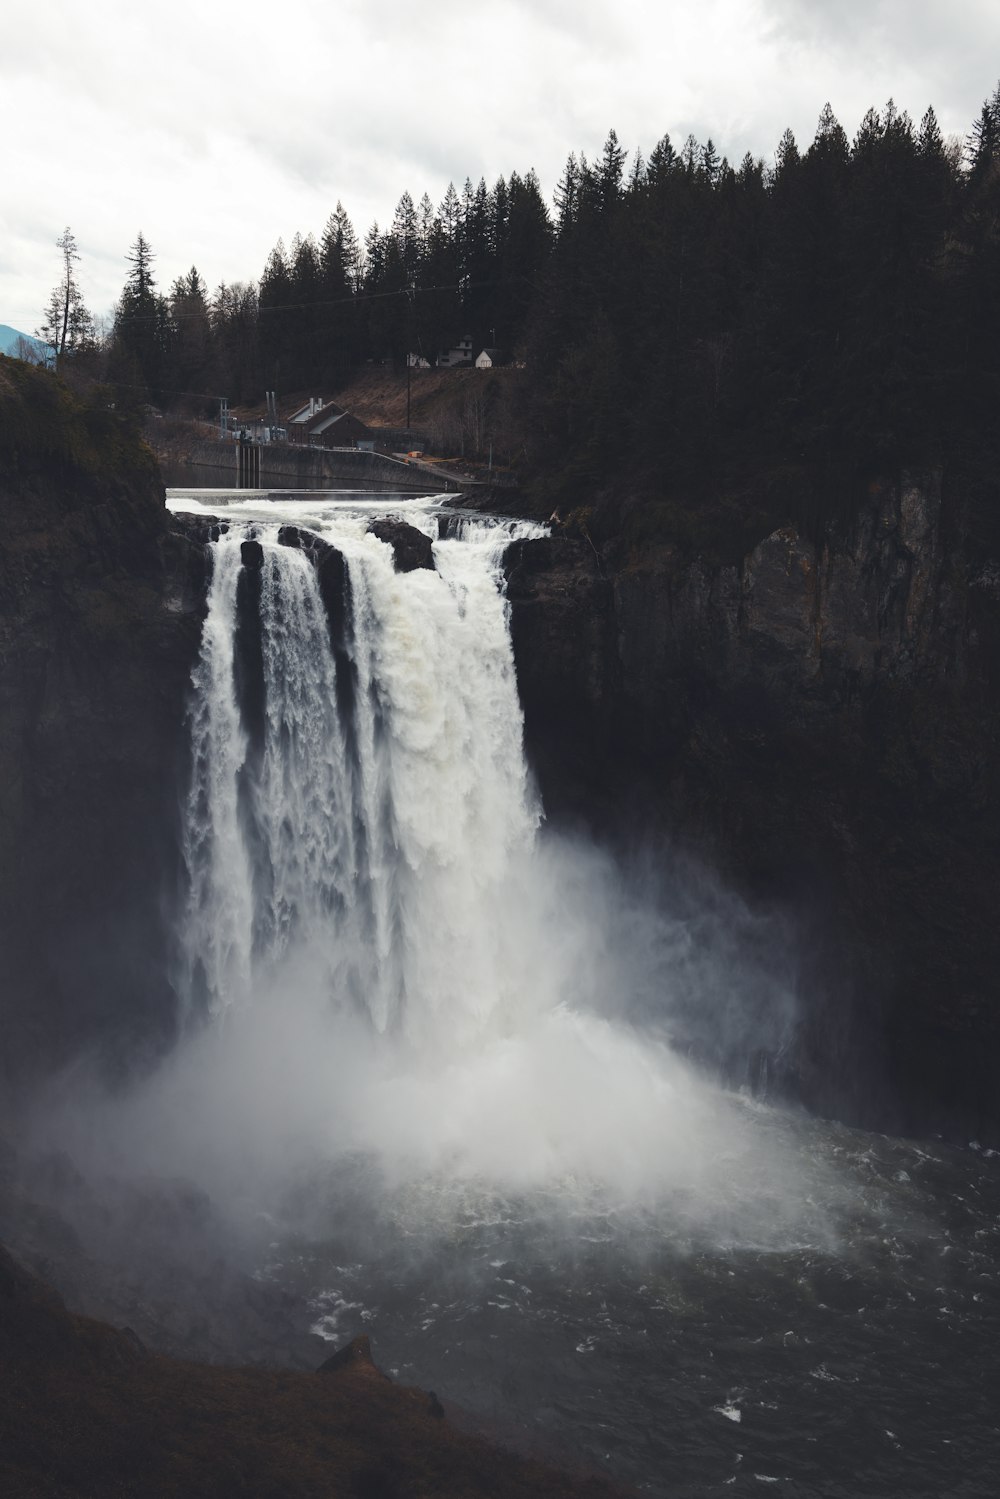 Snoqualmie Falls in a forest